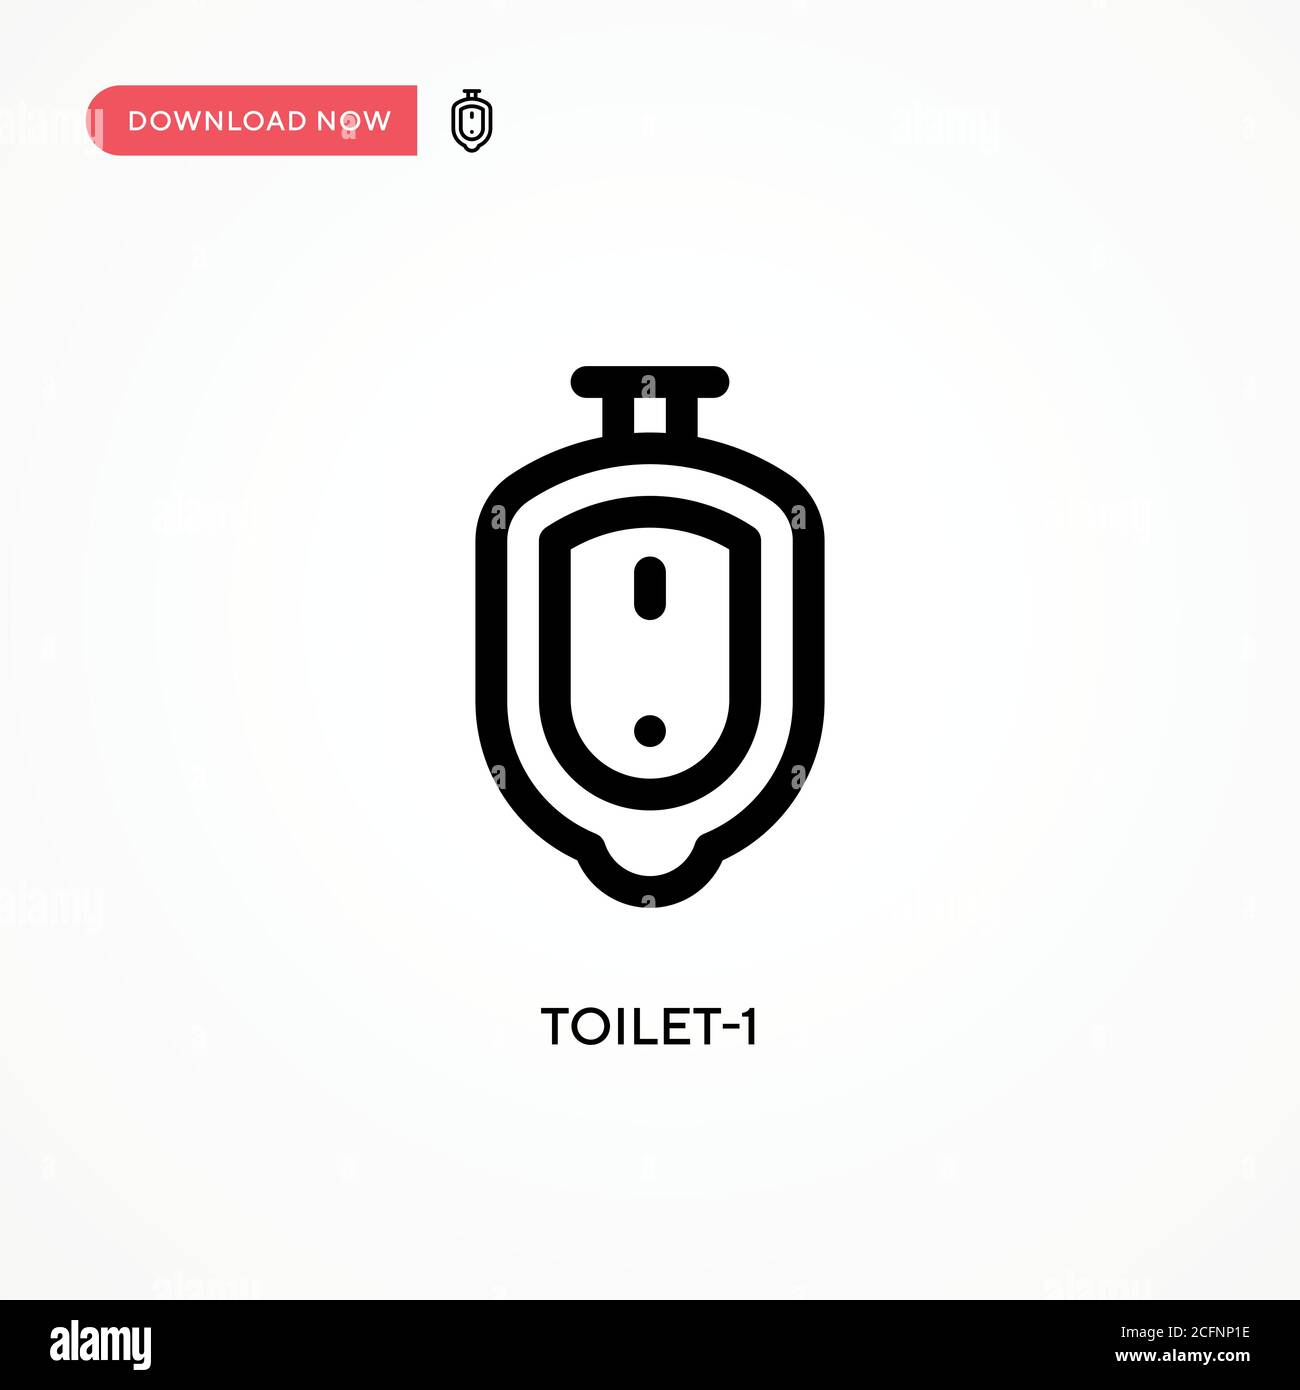 Toilet-1 vector icon. Modern, simple flat vector illustration for web site or mobile app Stock Vector